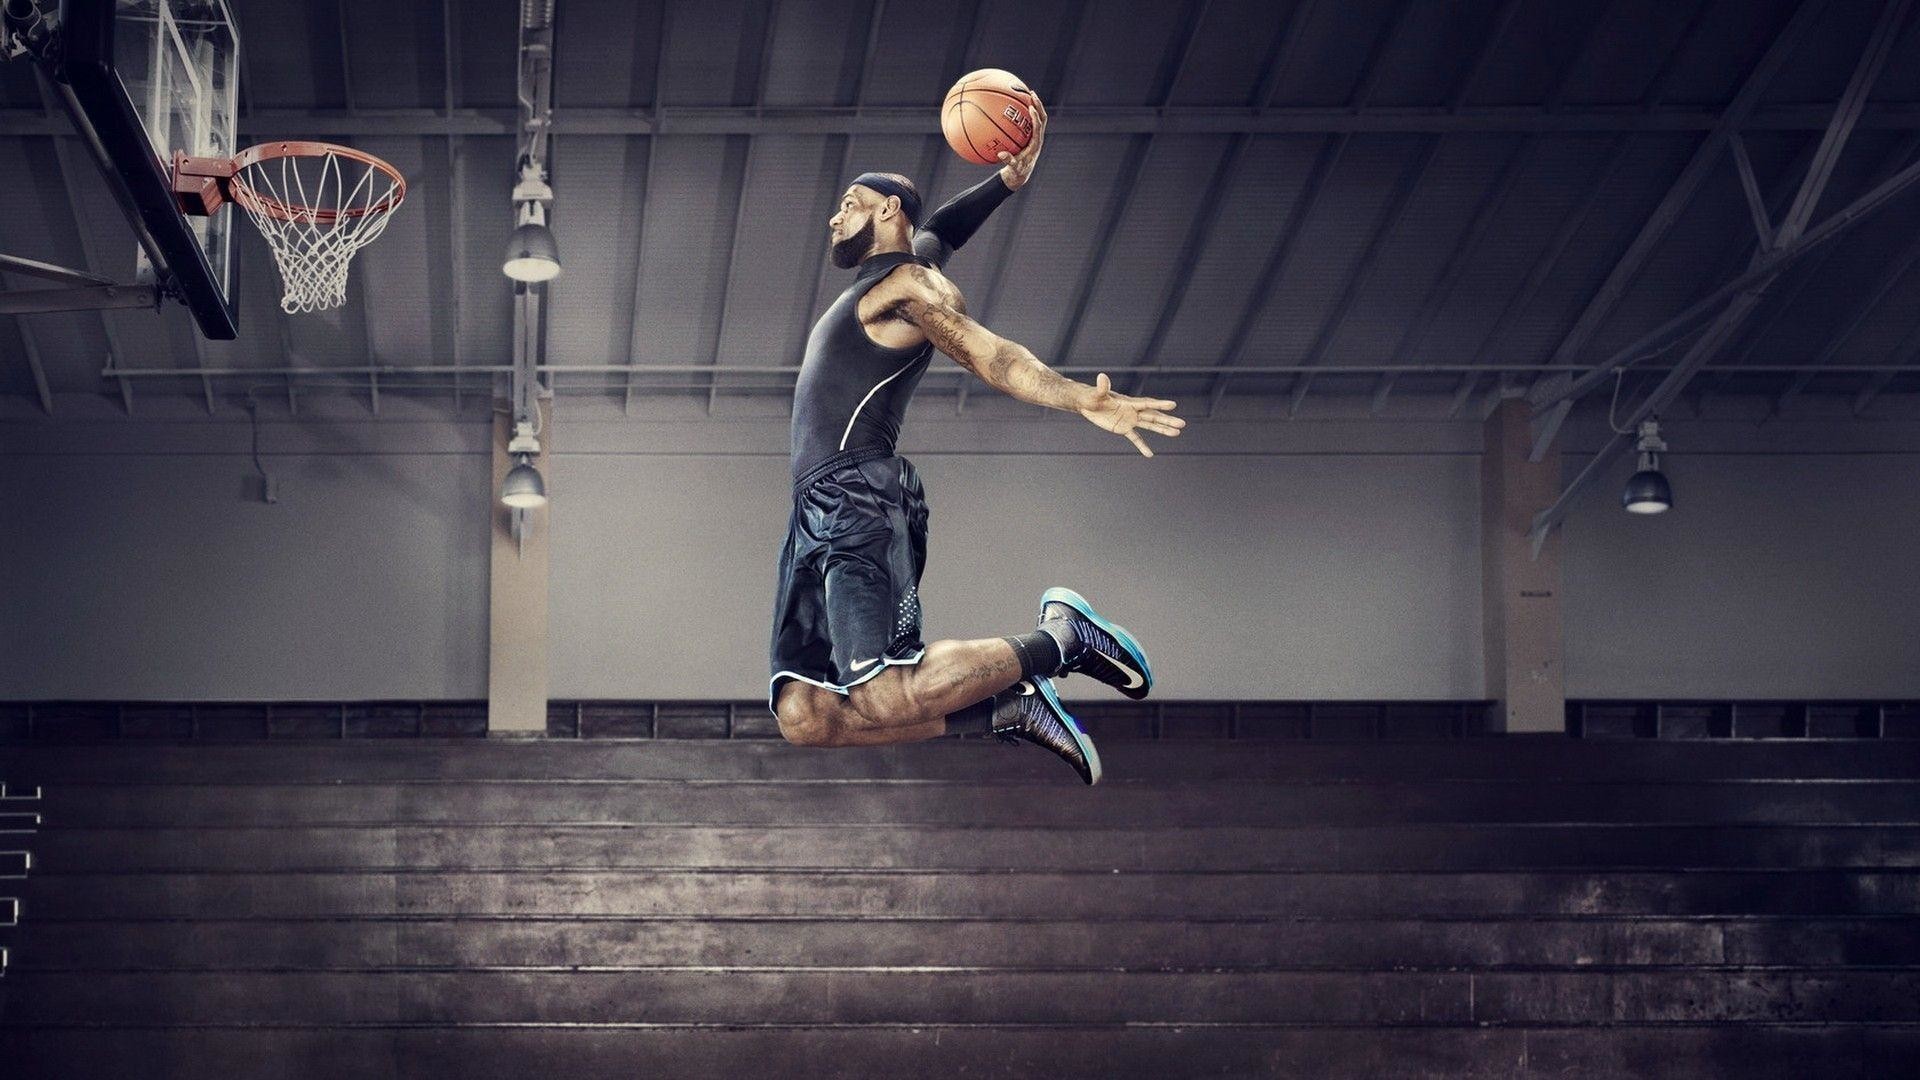 1920x1080 Lebron James Dunk Exclusive HD Wallpapers #4700